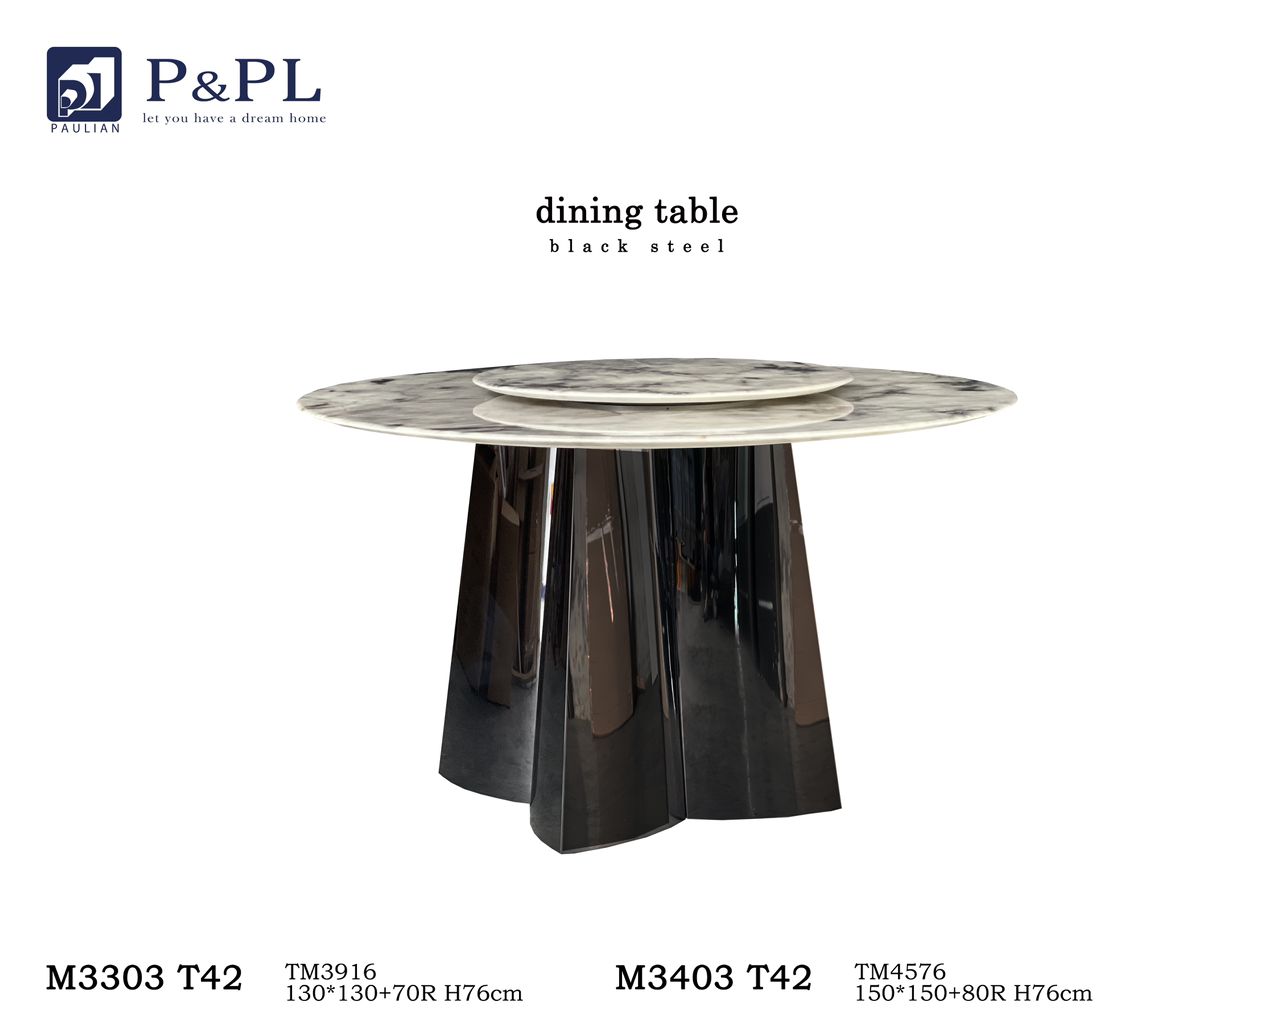 NATURAL STONE DINING SET – M3403 T42